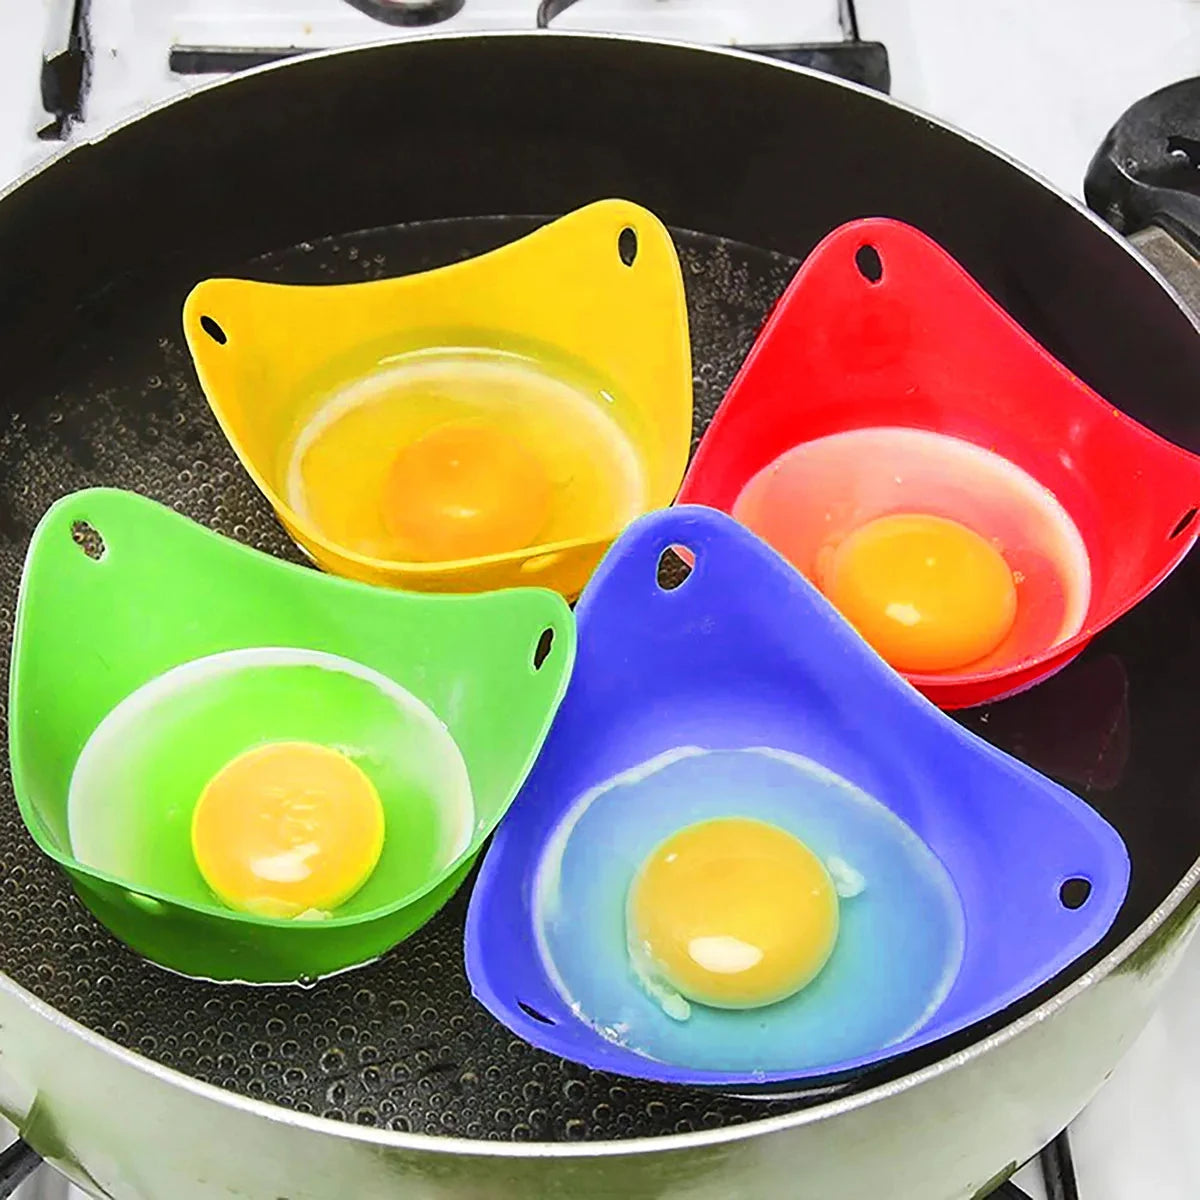 4PCS Silicone Egg Poacher Poaching Pods Pan Mould Egg Mold Bowl Rings Cooker Boiler Kitchen Cooking Tool Accessories Gadget